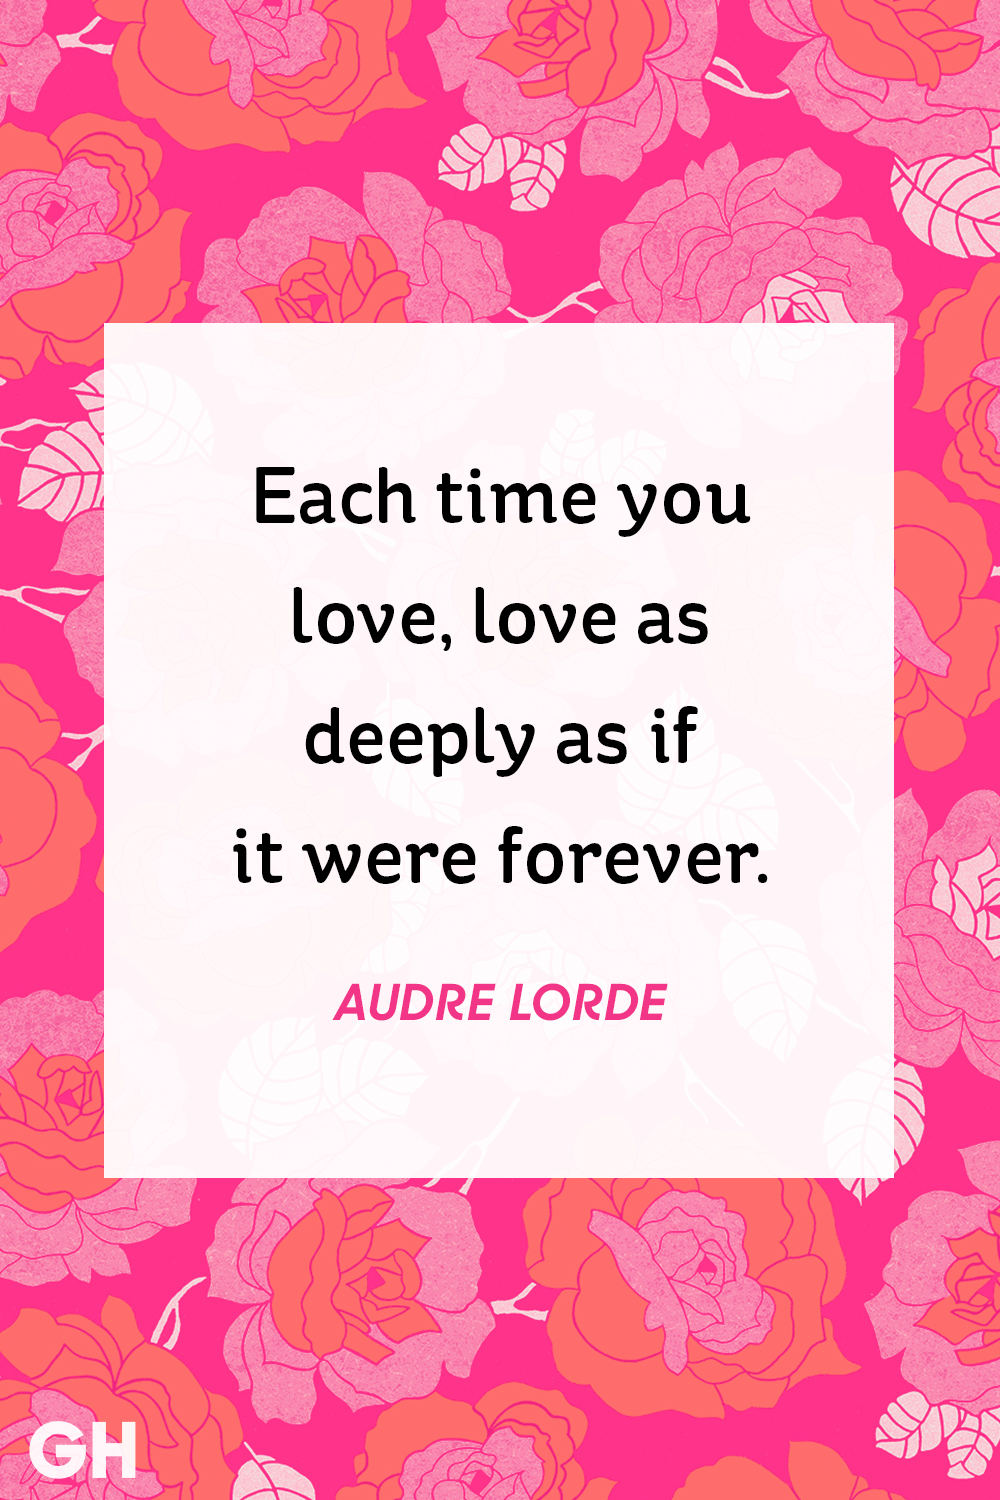 35 Cute Valentine's Day Quotes - Best Romantic Quotes About